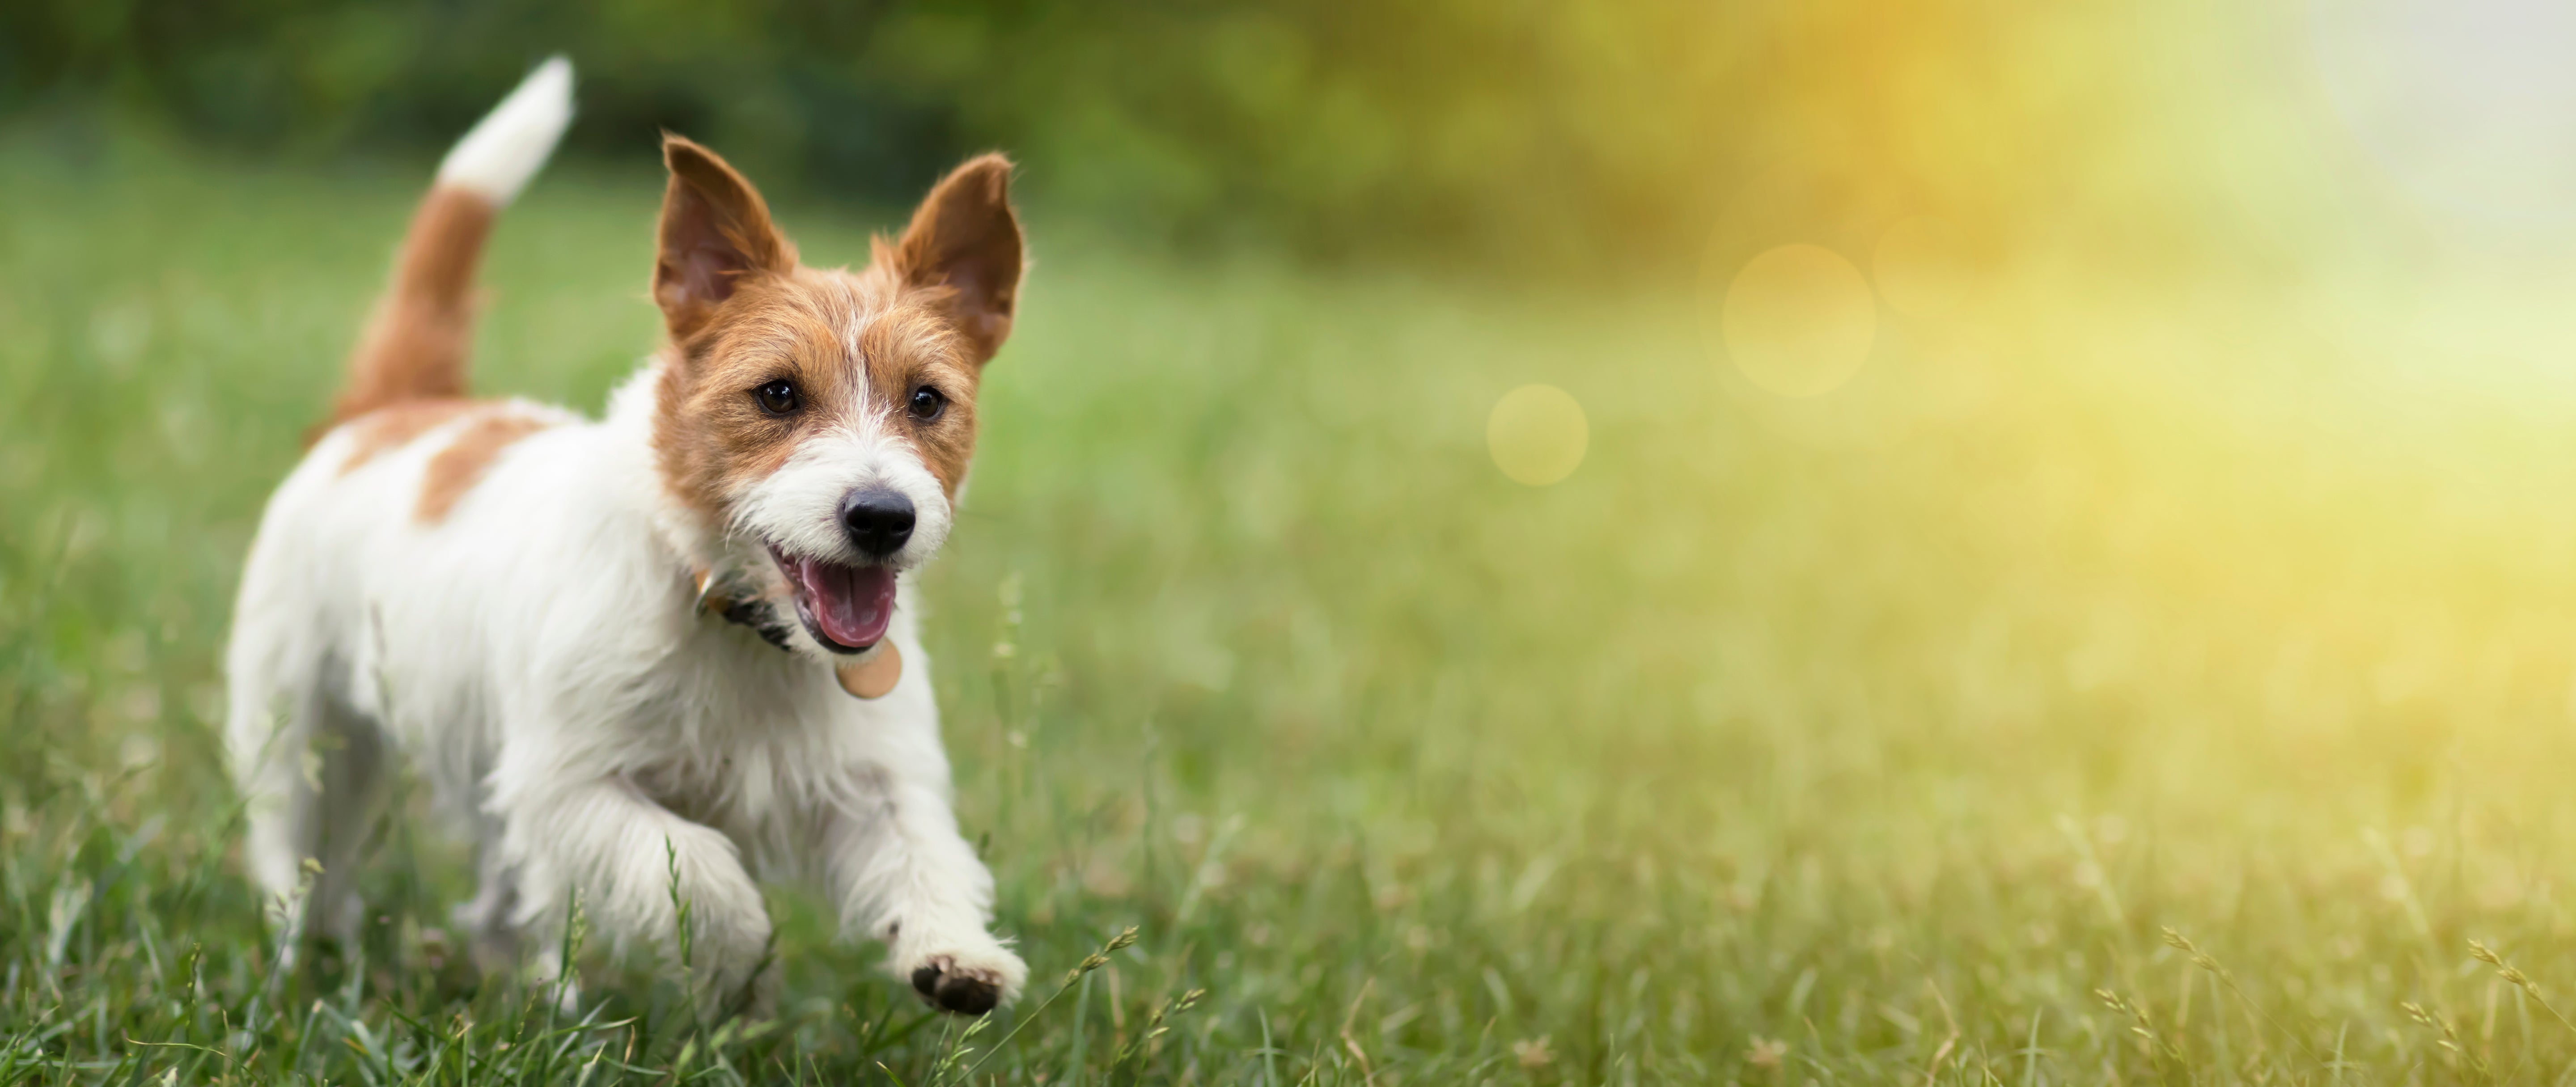 What does your dog think on their daily walks?